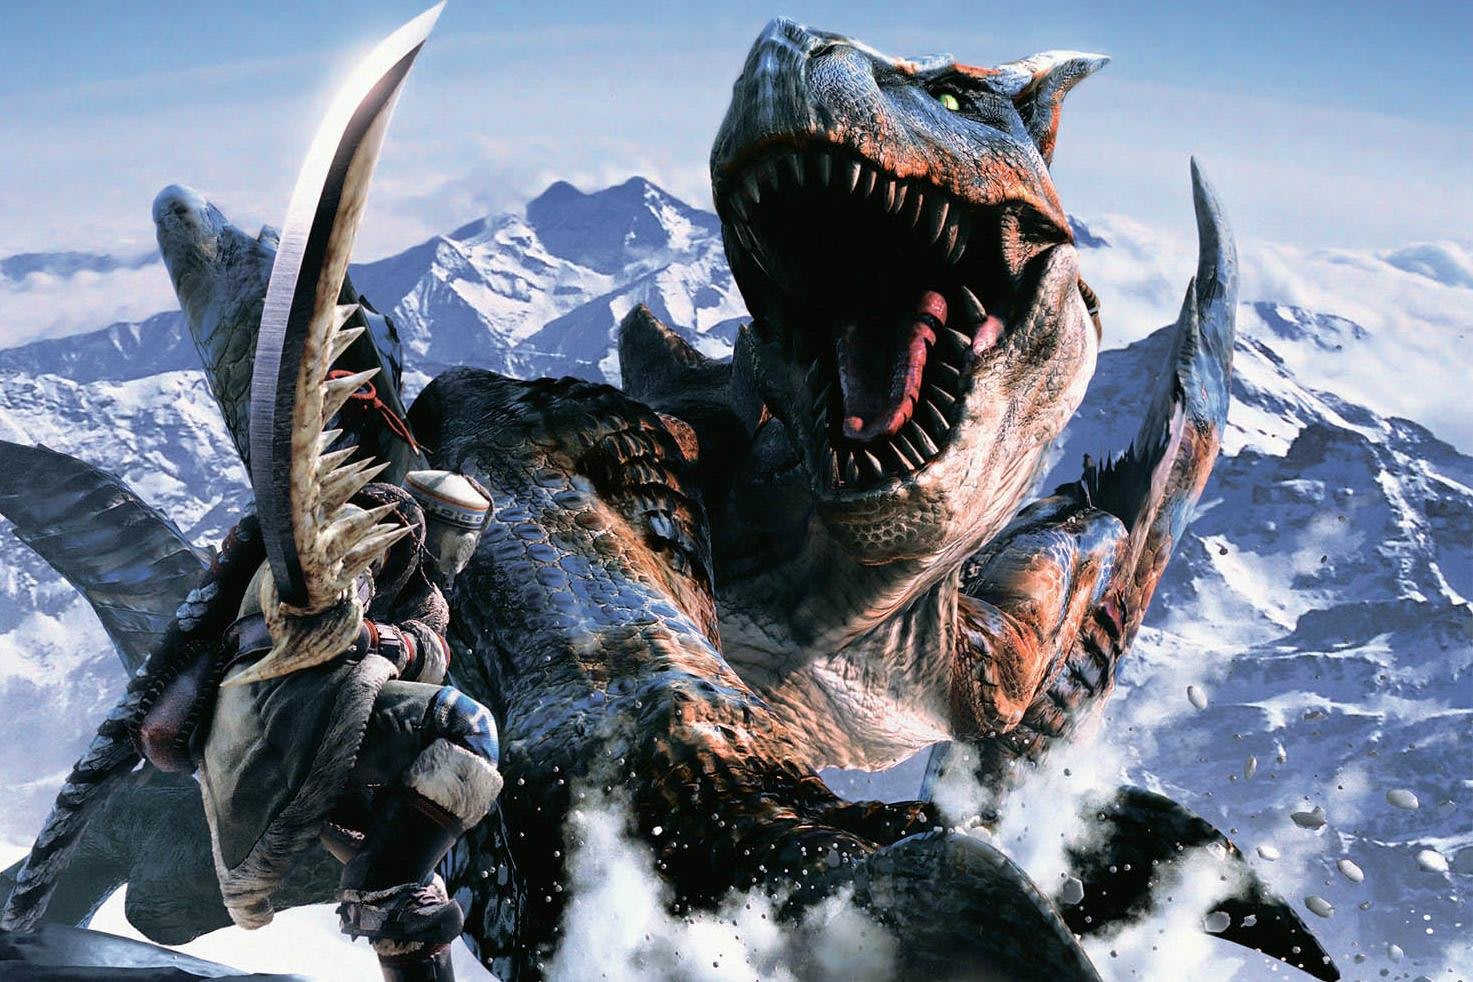 10 trivia facts about the Monster Hunter video game